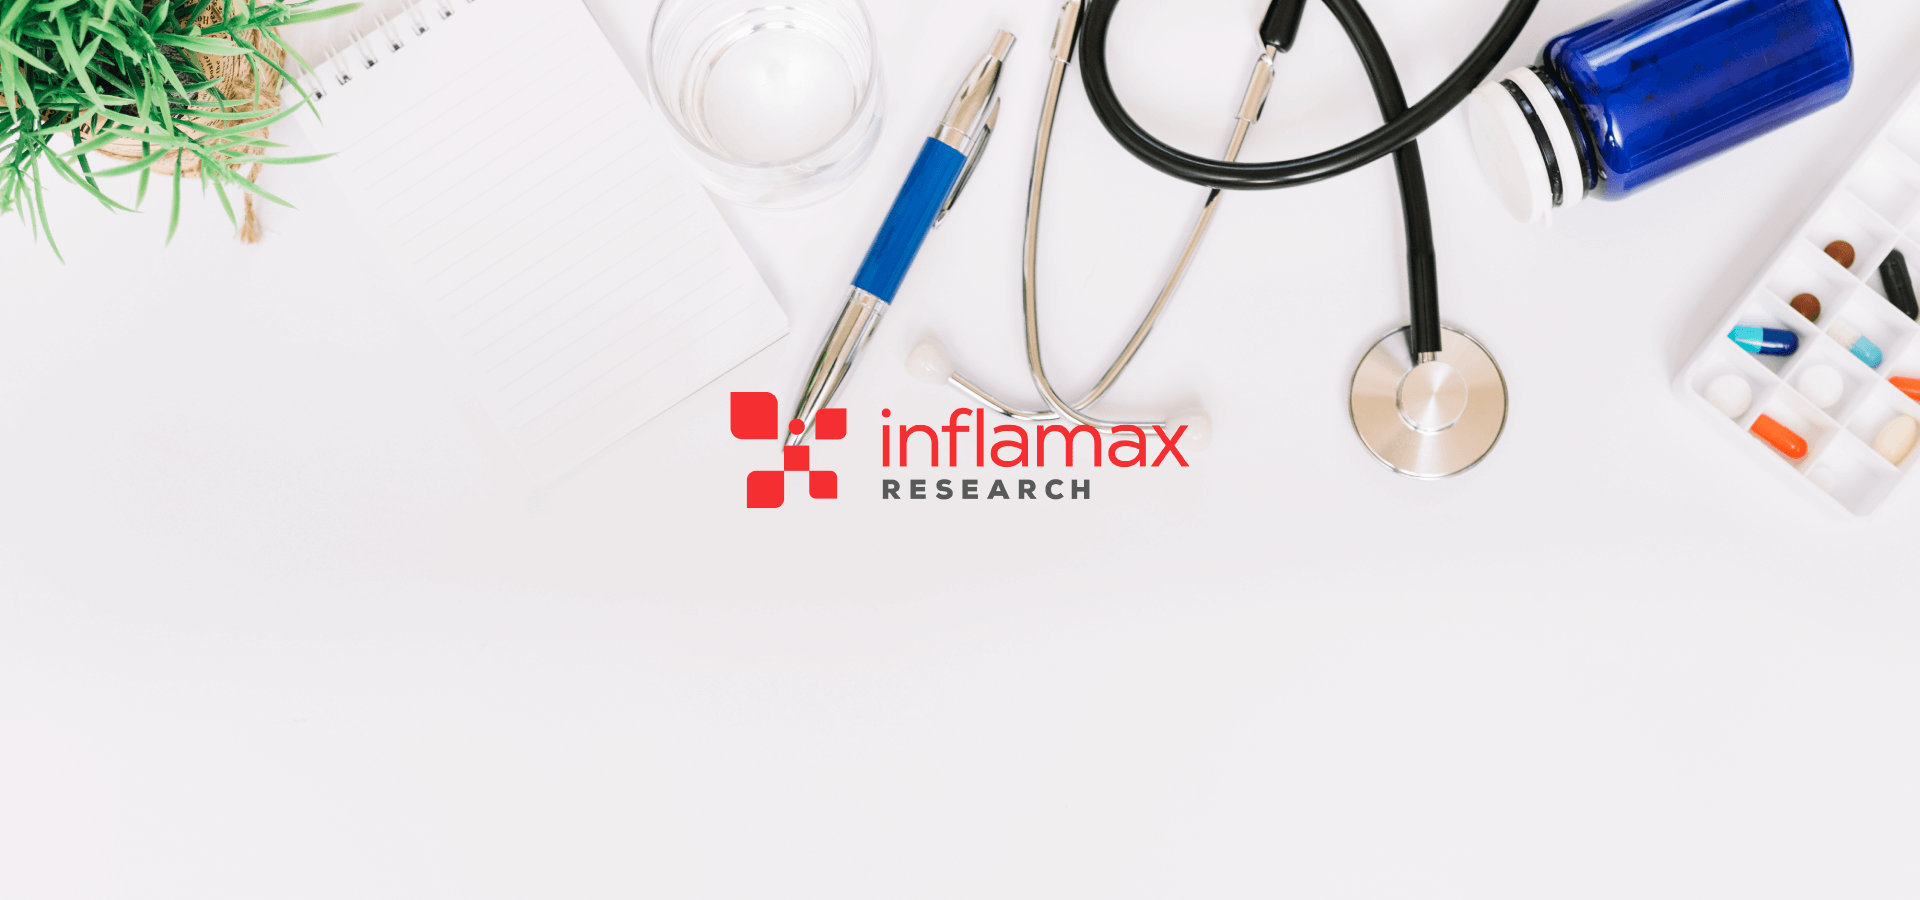 Web Development for Inflamax Research